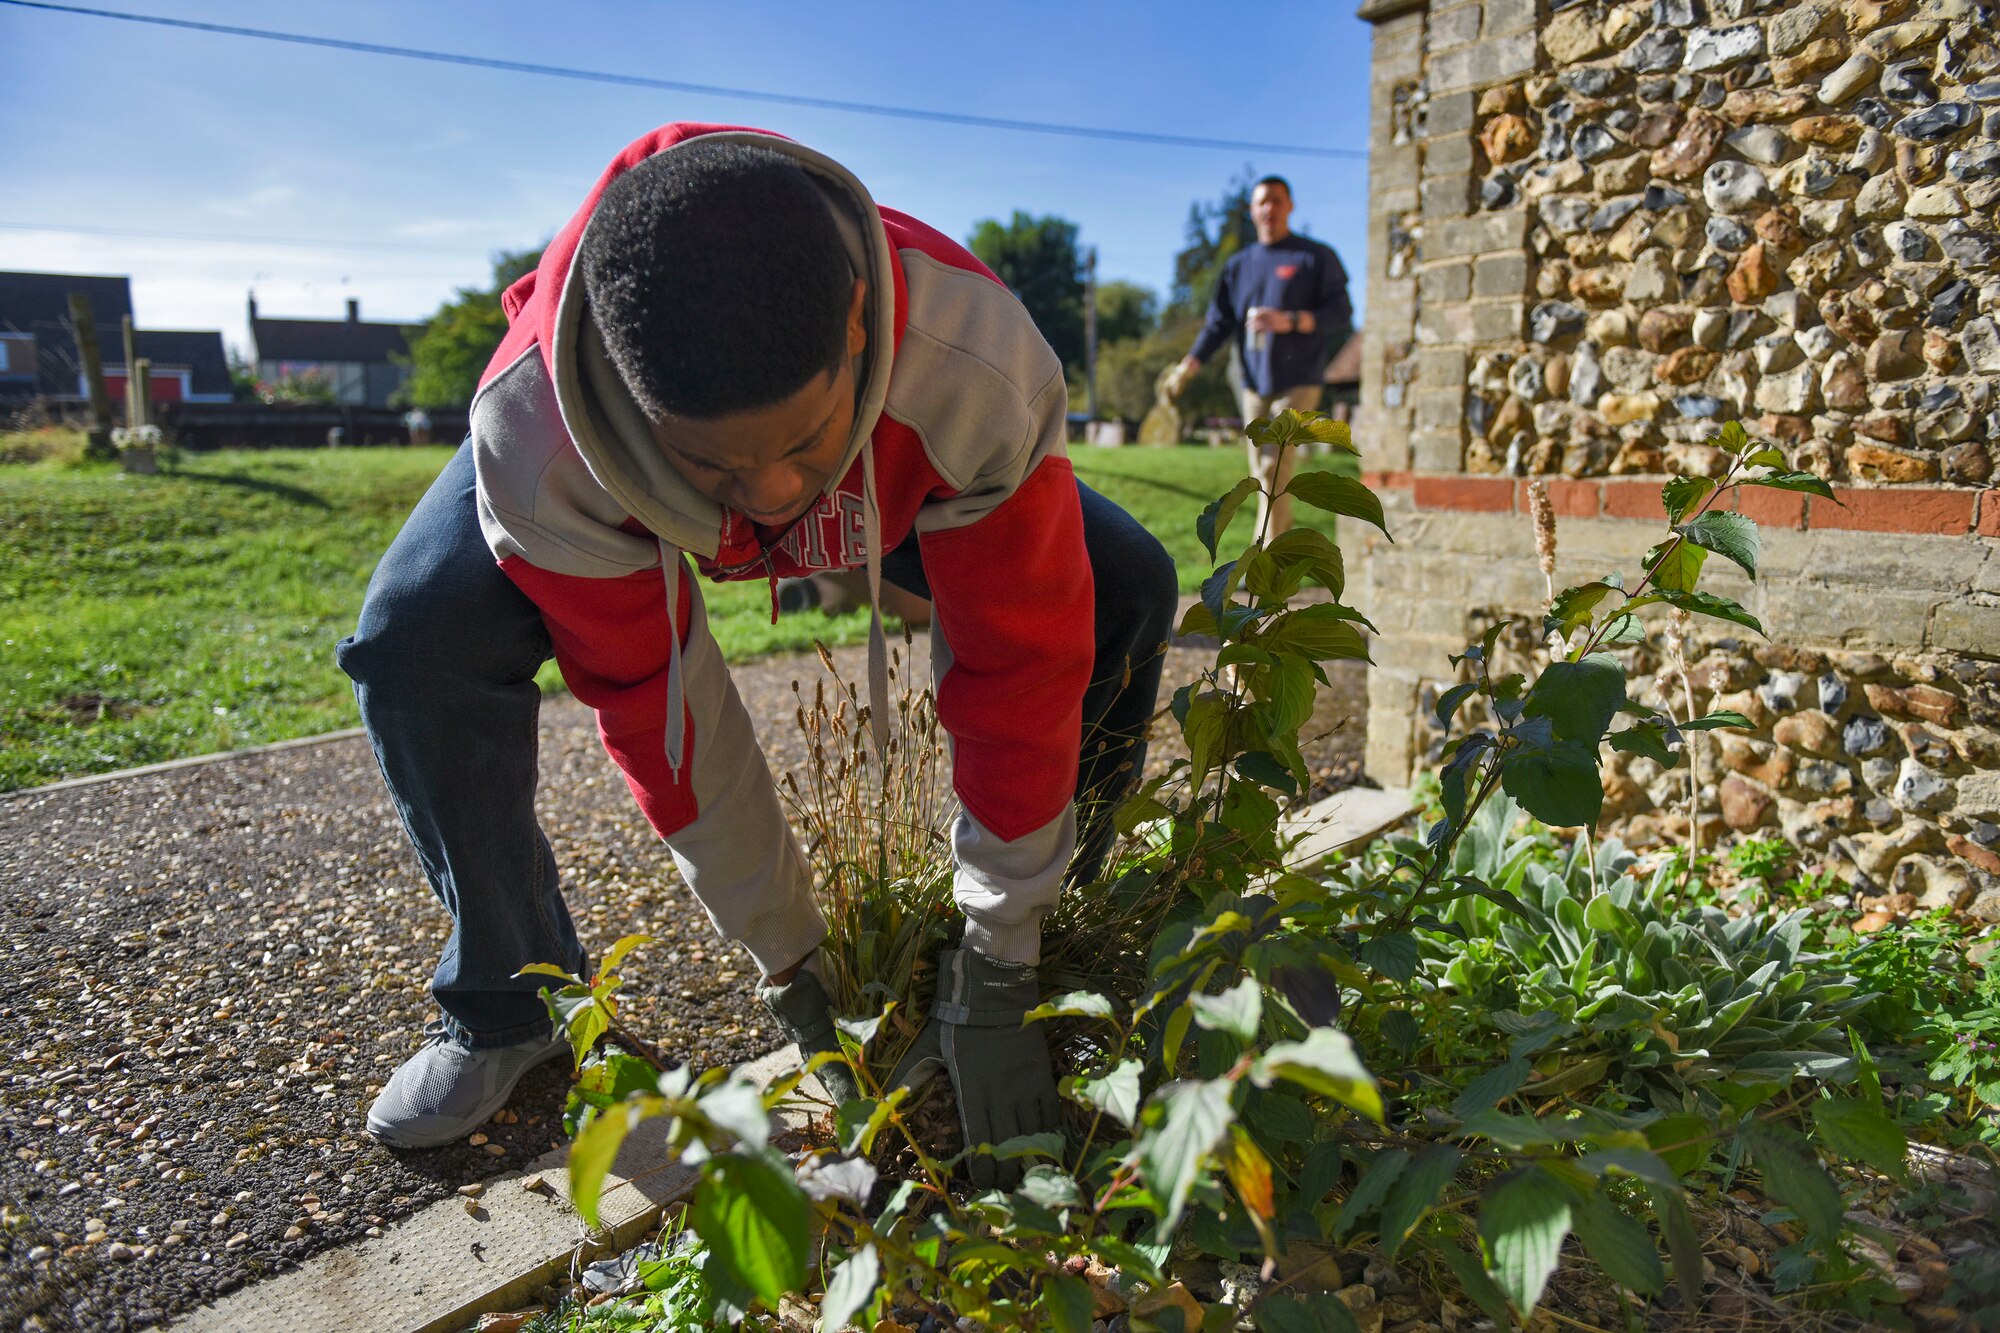 U.S. Air Force Staff Sgt. Kenneth Hummons, weeds along St. John’s Church during a volunteer event in Beck Row, England, Sept. 29, 2018. Approximately 20 individuals to volunteered to clean the church. (U.S. Air Force photo by Staff Sgt. Christine Groening)